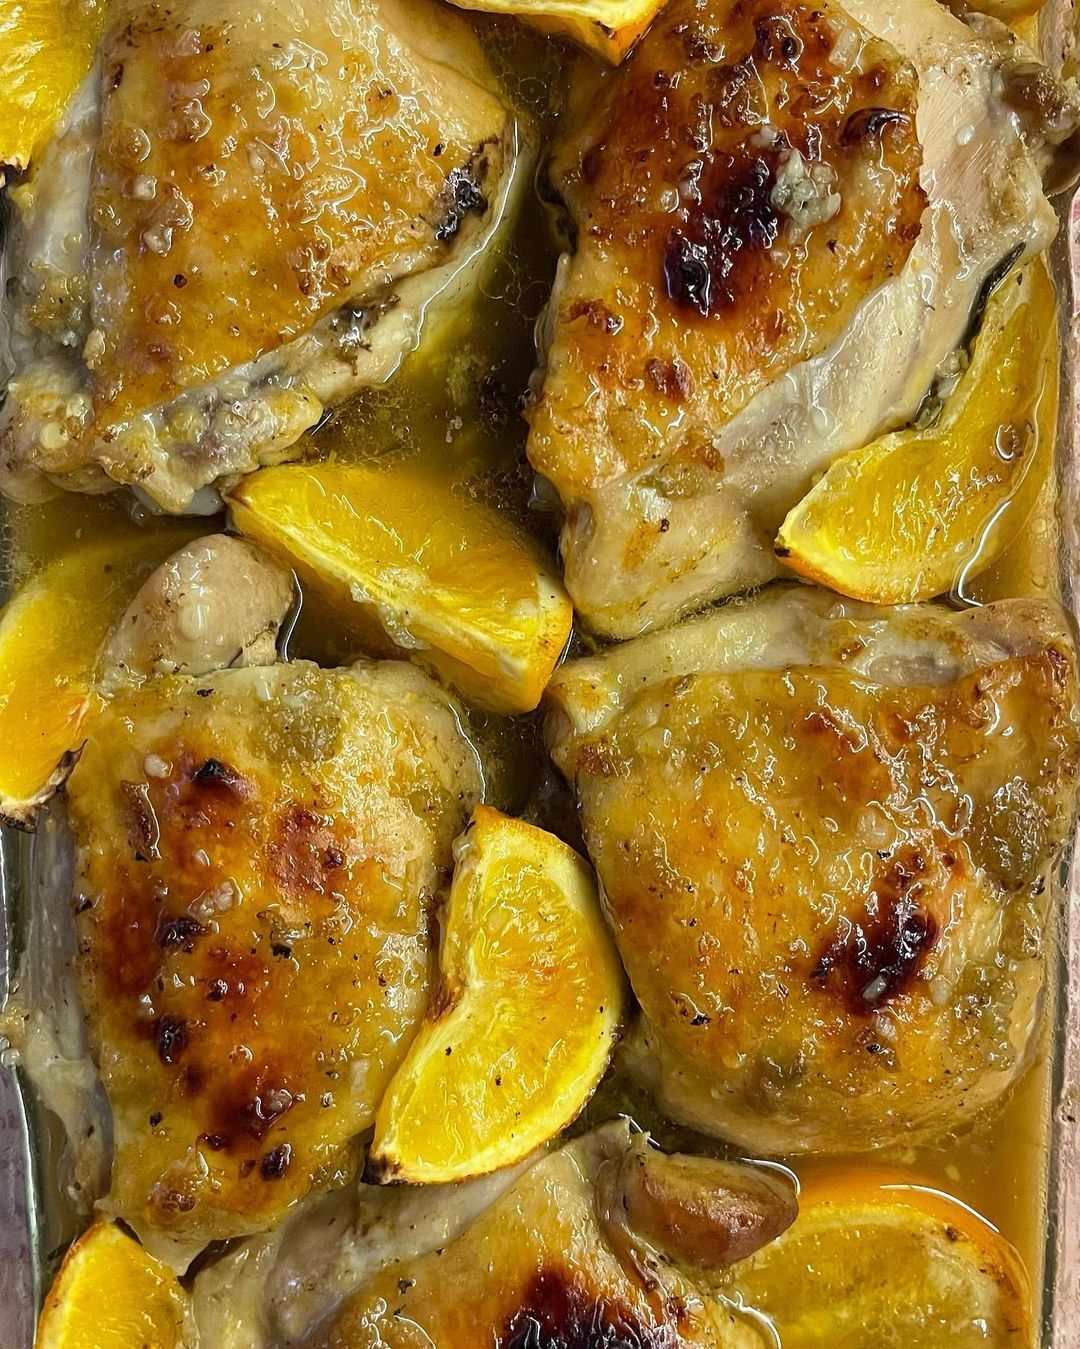 Finished meat with oranges